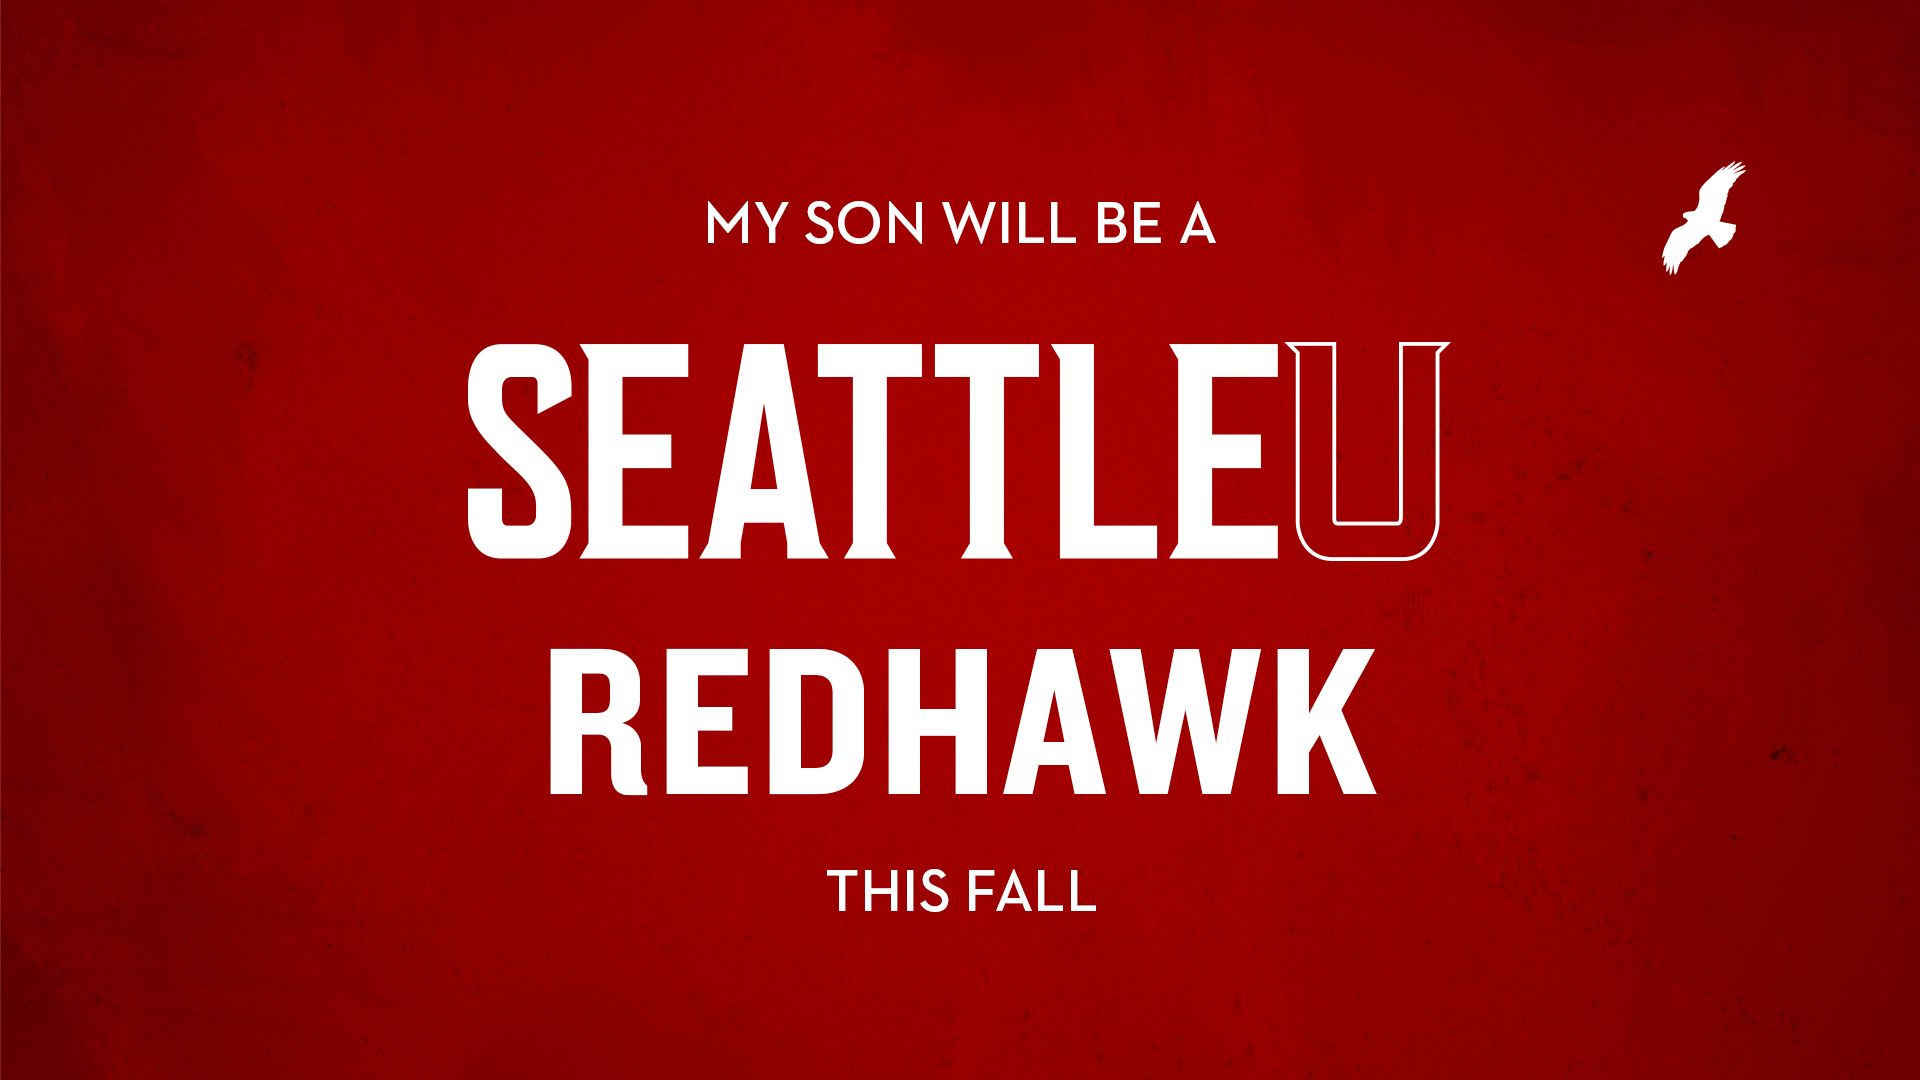 My Son will be a Redhawk